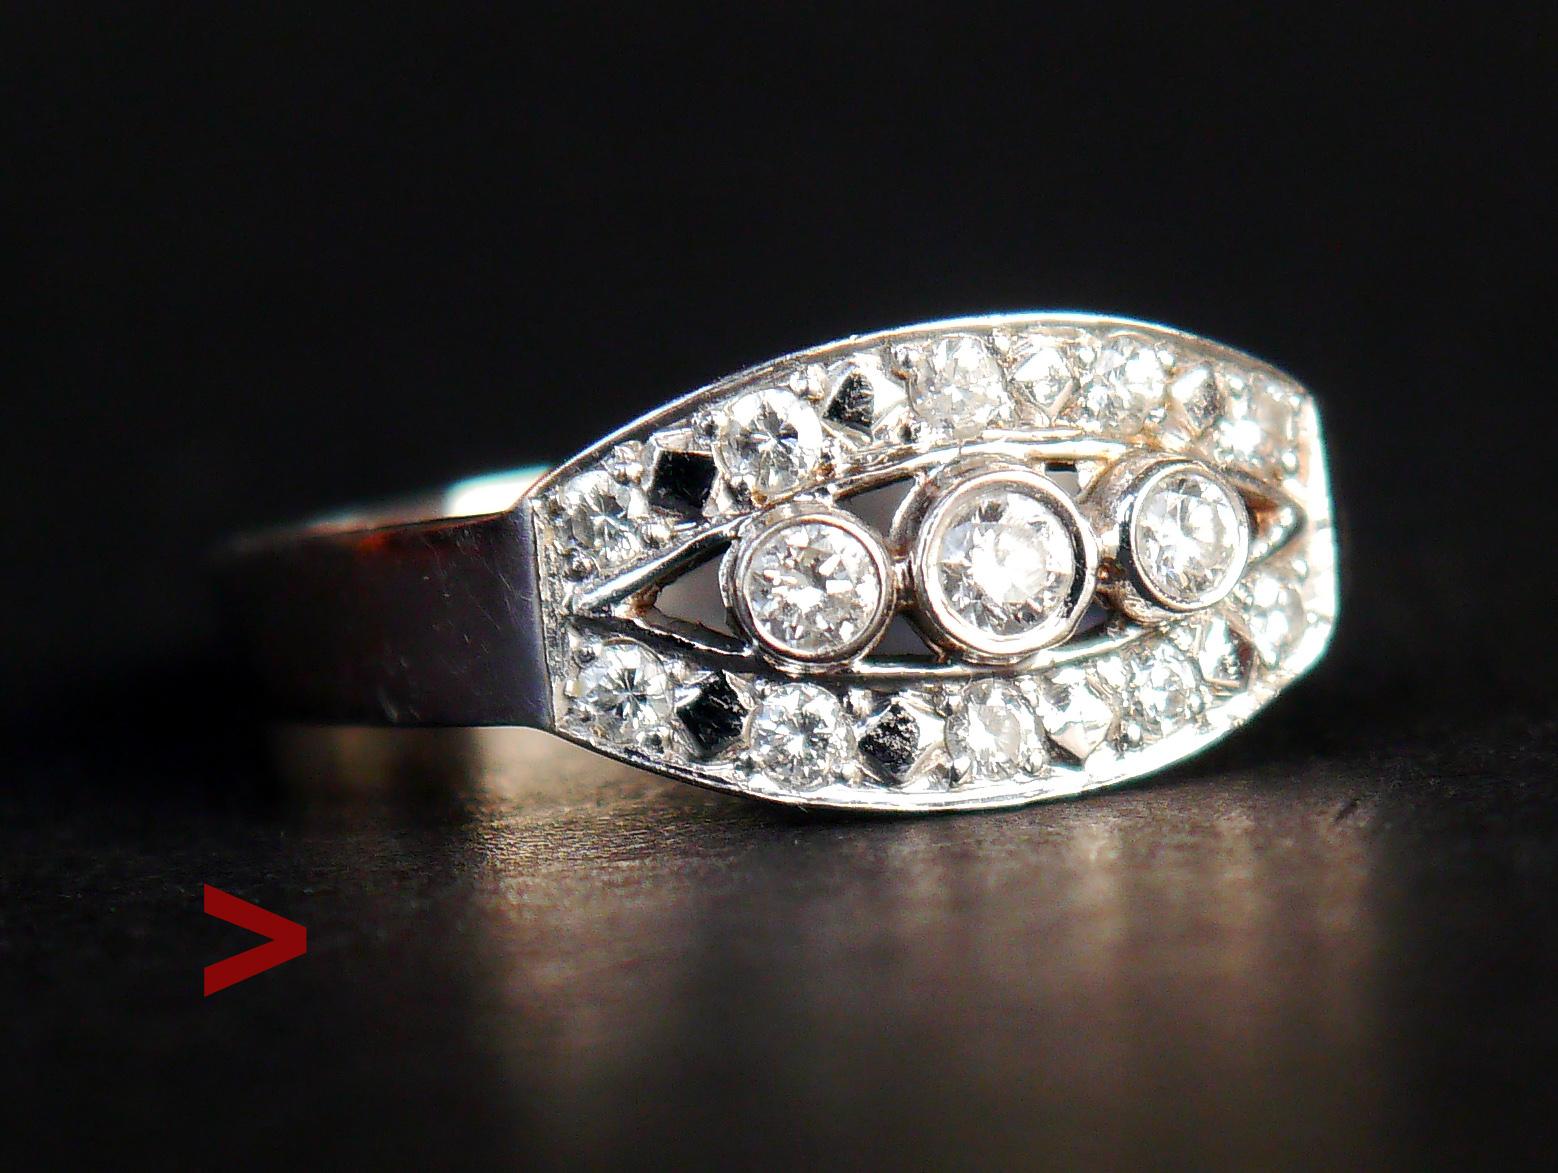 Vintage Ring in solid 18K White Gold decorated with Diamonds.

Made in Sweden, Marked 18K; maker's hallmarks ,city of Stockholm; Year marks: B10 =1976

13 bezel and pave set diamond cut Diamonds Color circa F,G ; VS . with total weight circa 0.34 in